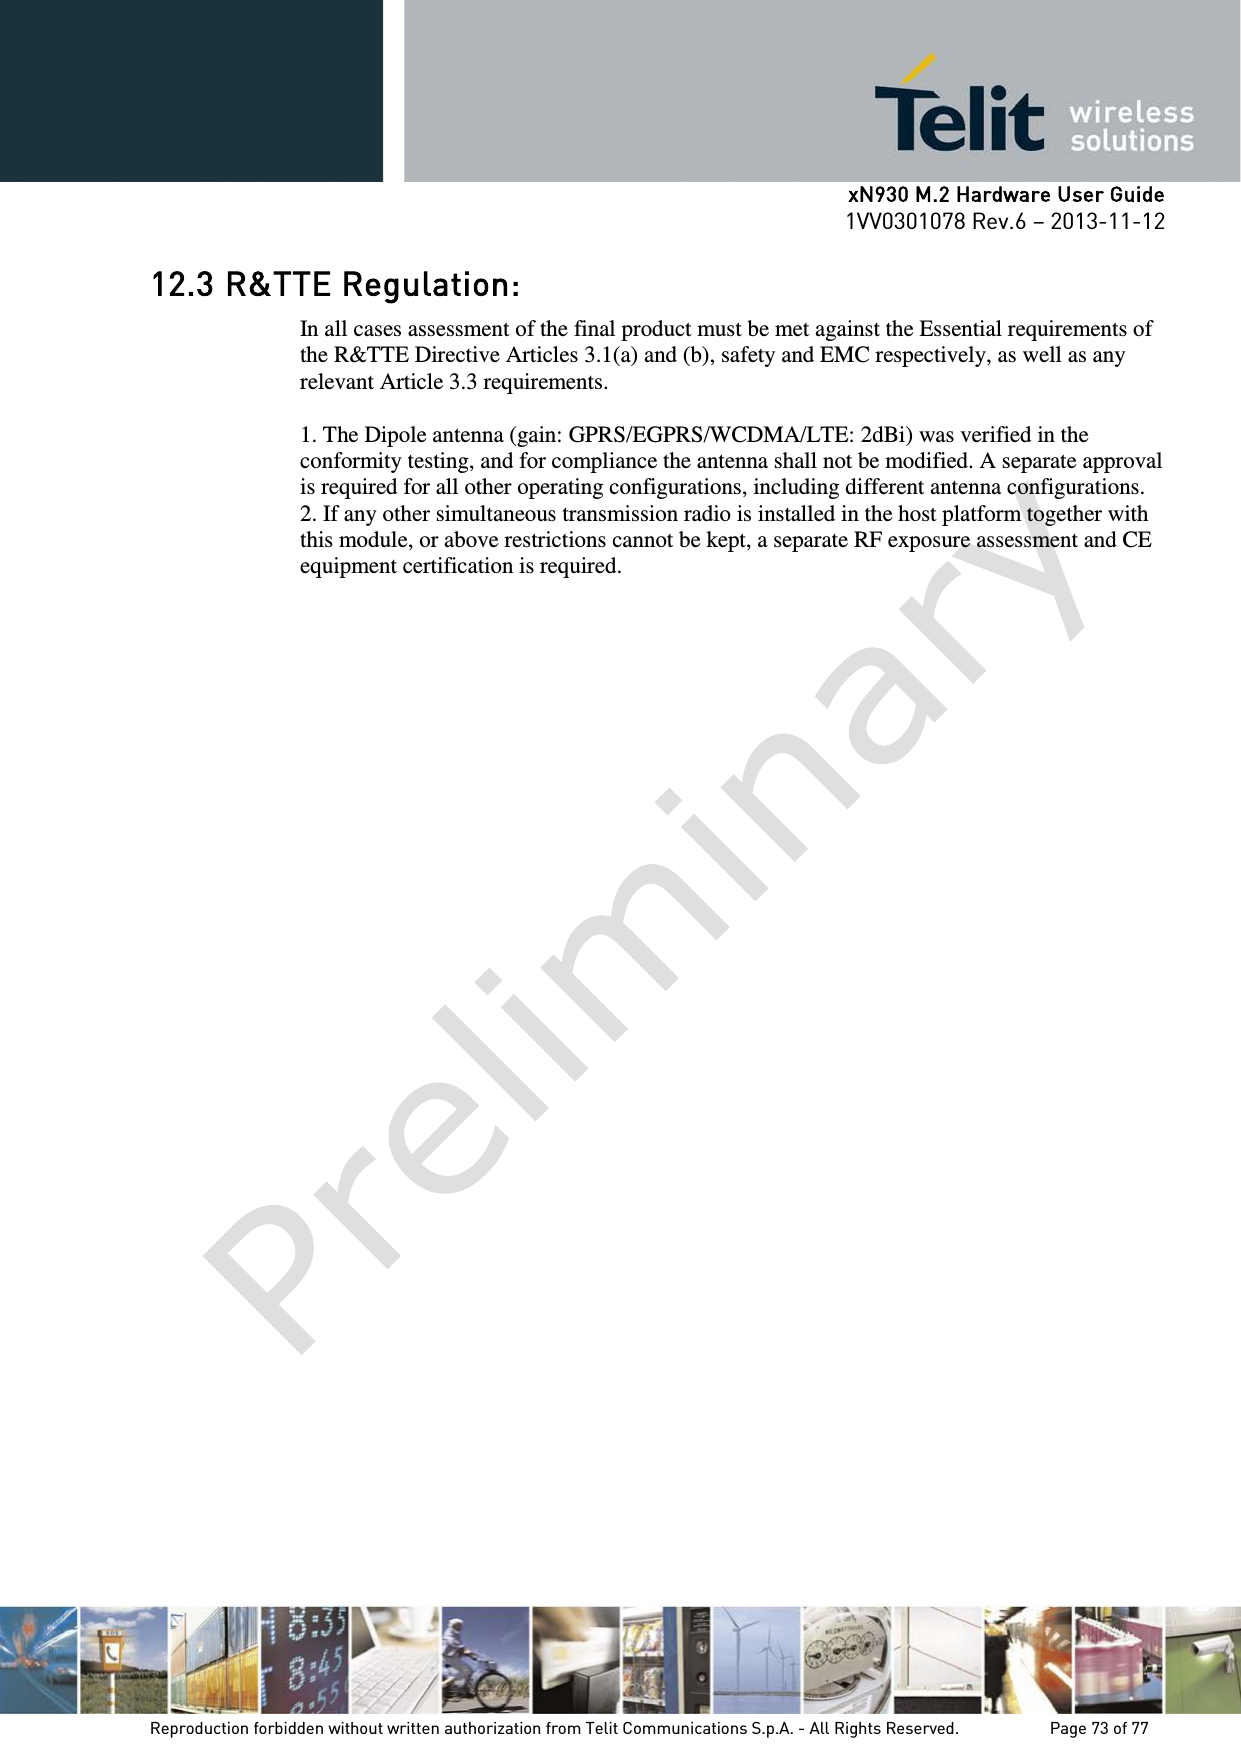      xN930 M.2 Hardware User Guide 1VV0301078 Rev.6 – 2013-11-12    12.3 R&amp;TTE Regulation: In all cases assessment of the final product must be met against the Essential requirements of the R&amp;TTE Directive Articles 3.1(a) and (b), safety and EMC respectively, as well as any relevant Article 3.3 requirements.  1. The Dipole antenna (gain: GPRS/EGPRS/WCDMA/LTE: 2dBi) was verified in the conformity testing, and for compliance the antenna shall not be modified. A separate approval is required for all other operating configurations, including different antenna configurations. 2. If any other simultaneous transmission radio is installed in the host platform together with this module, or above restrictions cannot be kept, a separate RF exposure assessment and CE equipment certification is required.    Reproduction forbidden without written authorization from Telit Communications S.p.A. - All Rights Reserved.    Page 73 of 77 